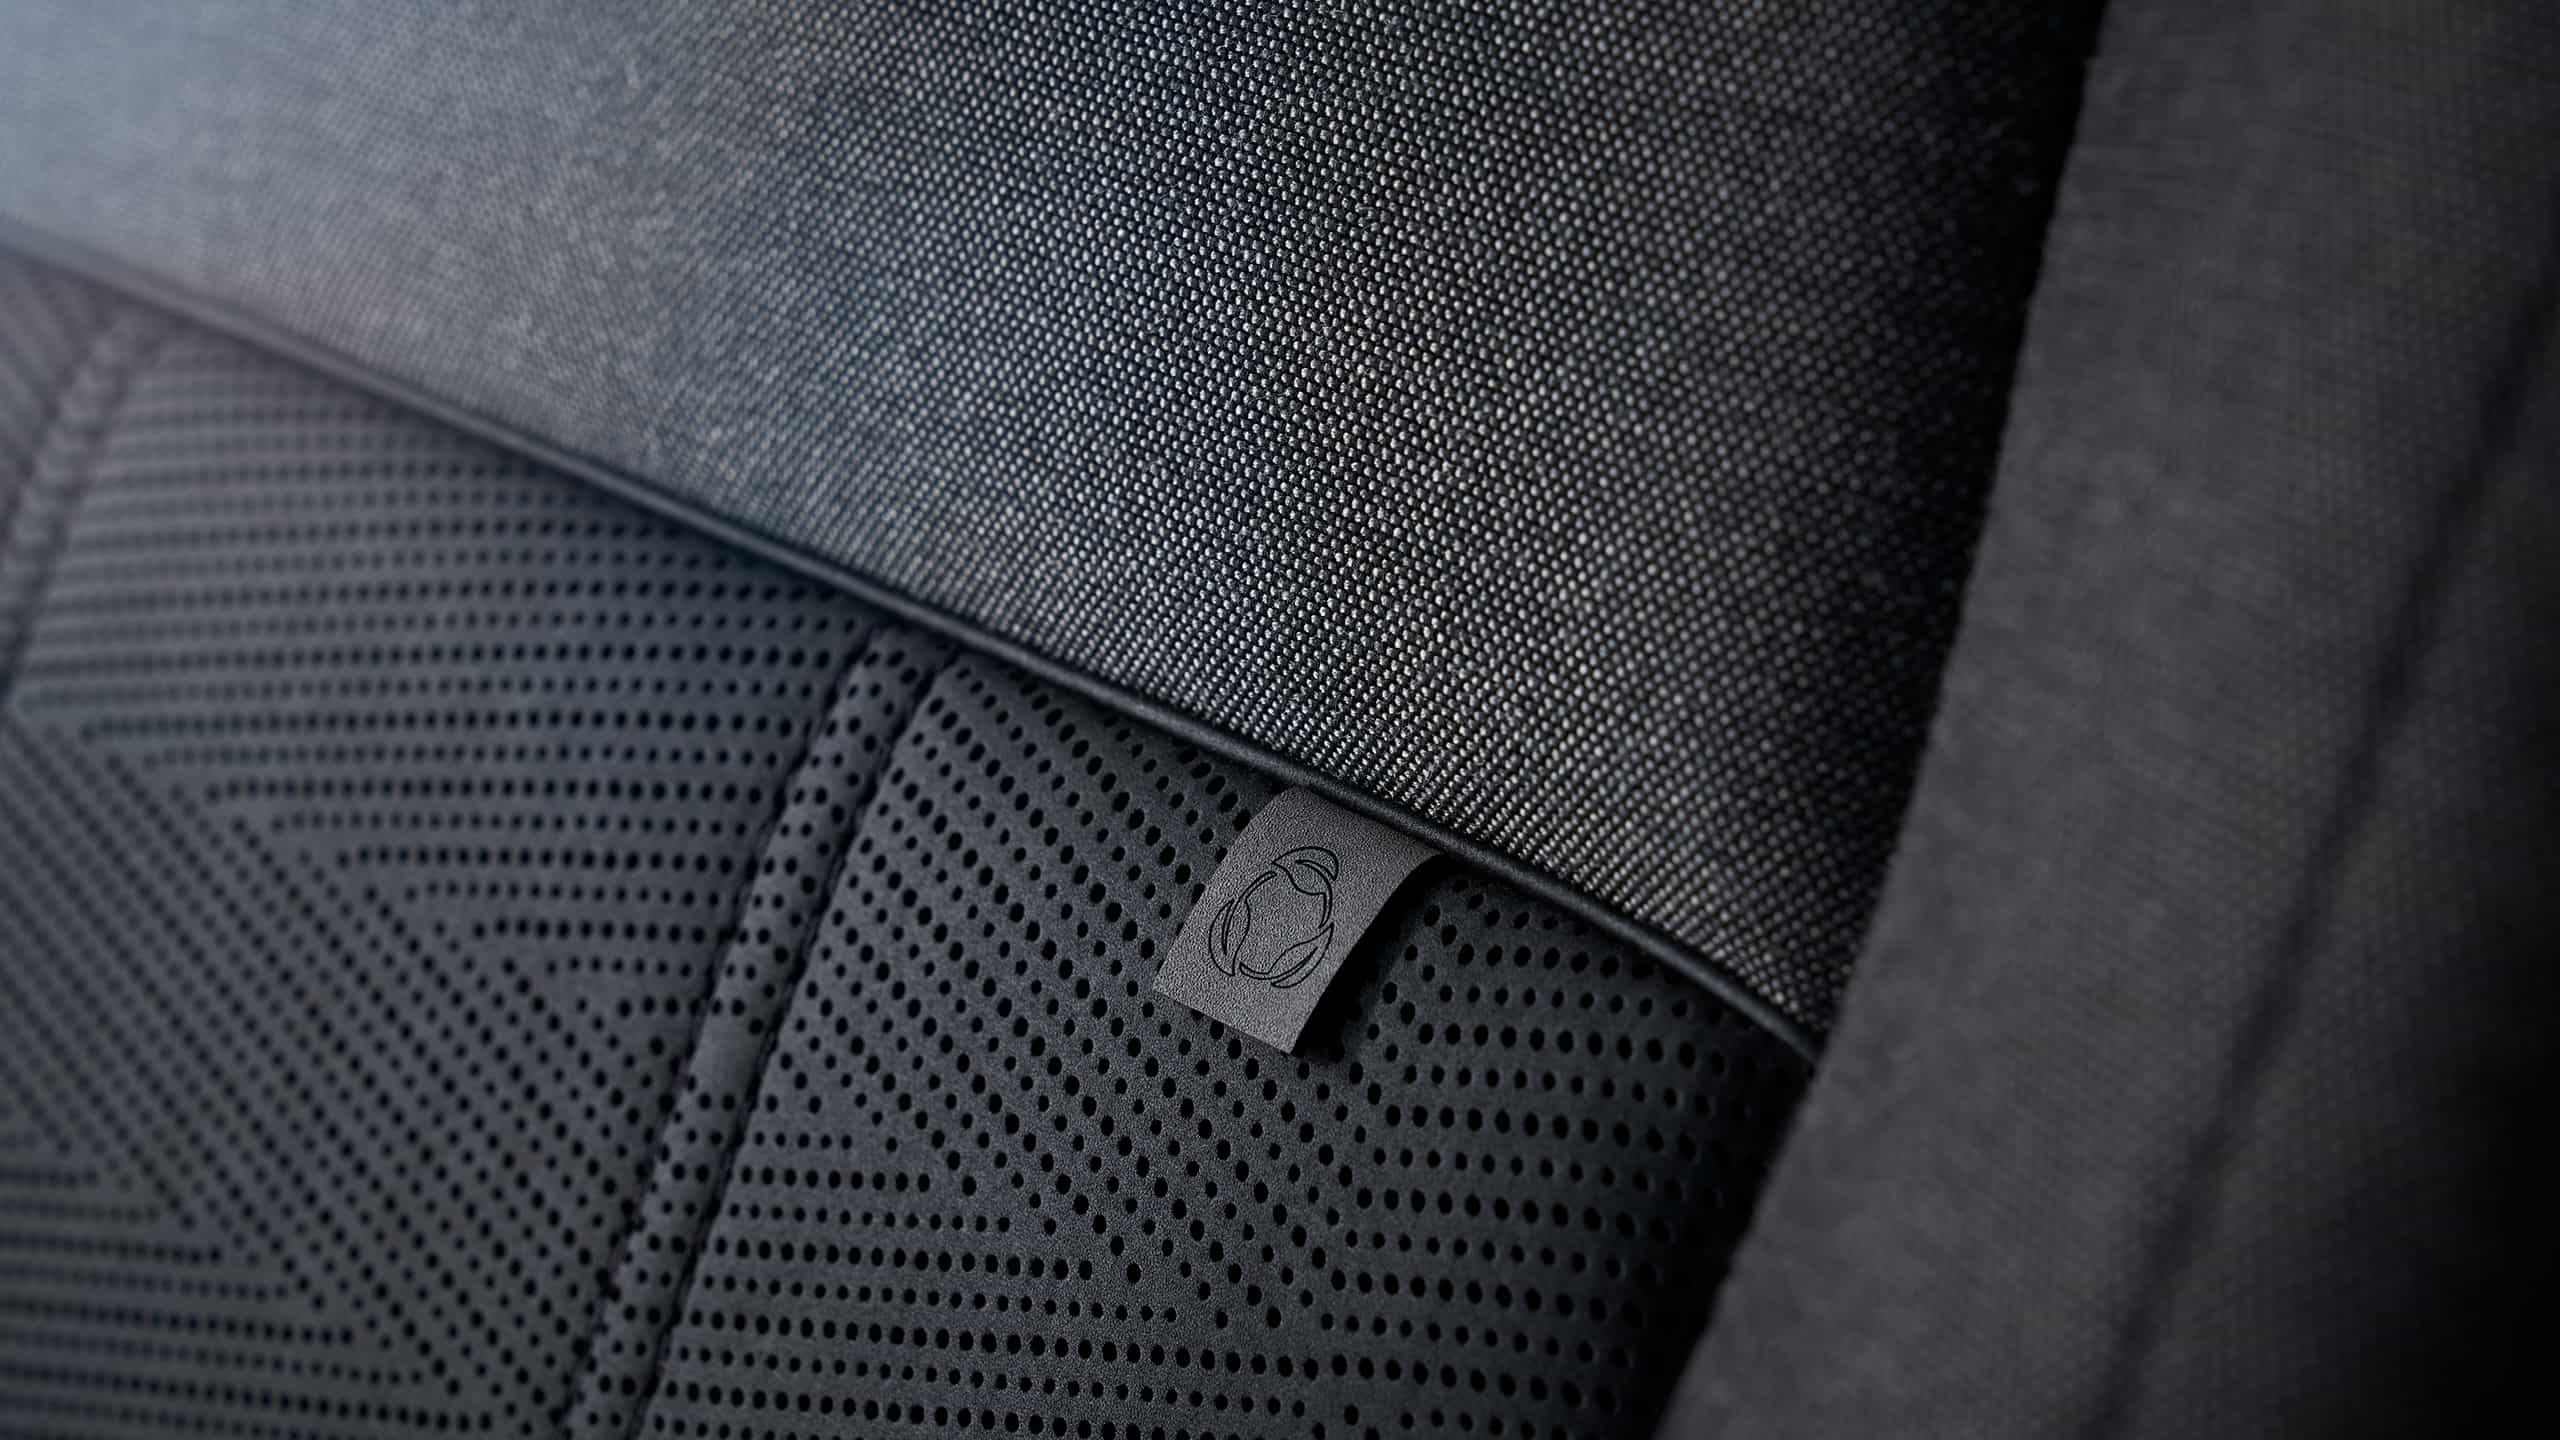 Extreme crop of interior seat leathers